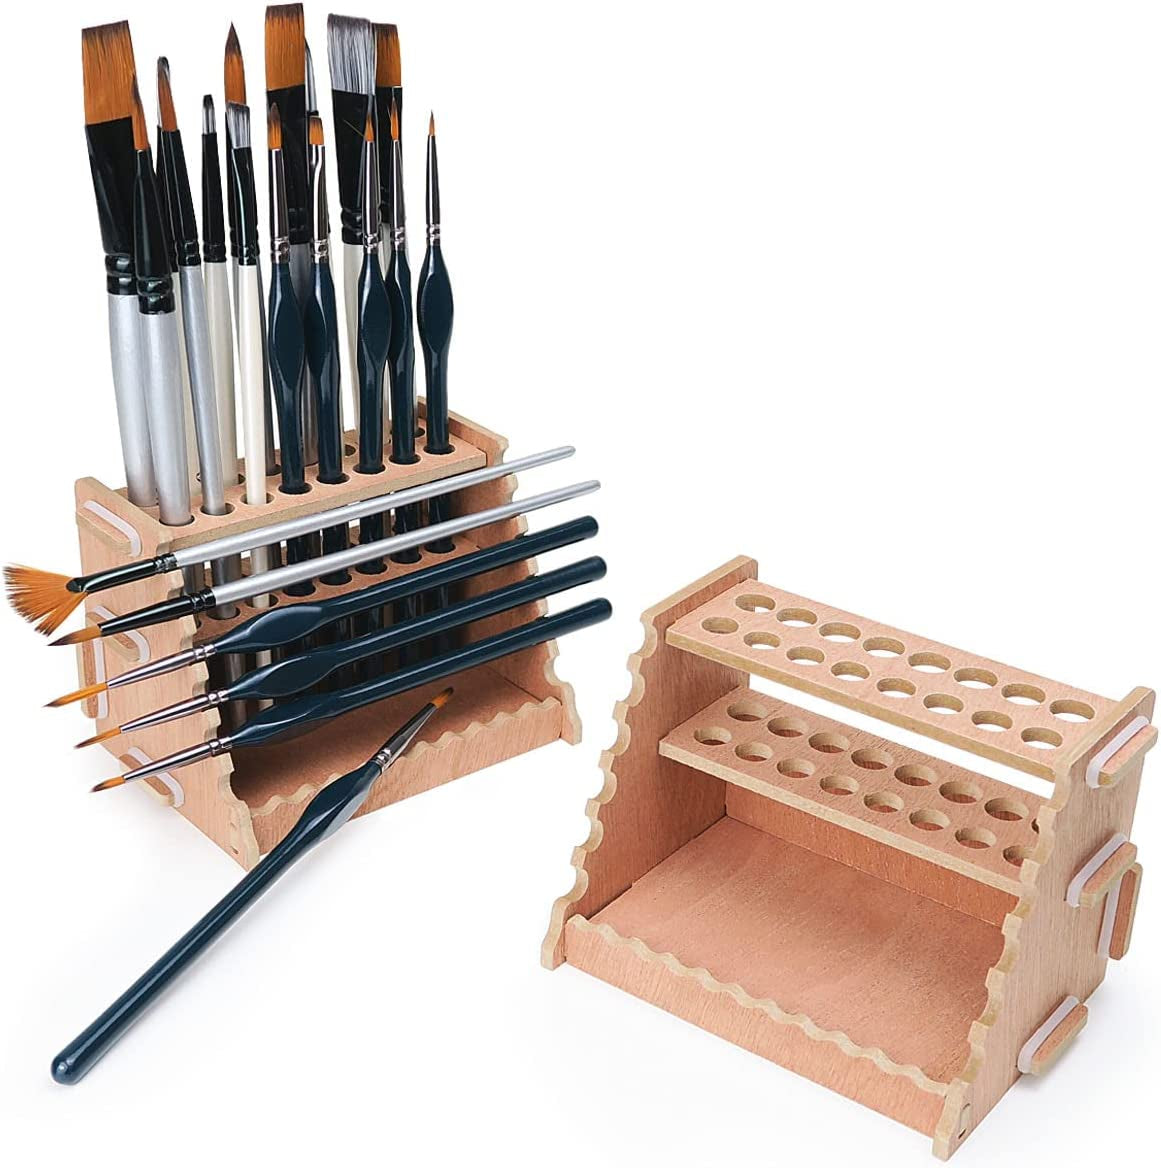 Wooden Paint Brush Holder for 44 Brushes - Desk Stand Paintbrush Organizer, Holding Rack for Pens, Paint Brushes, Colored Pencils, Markers